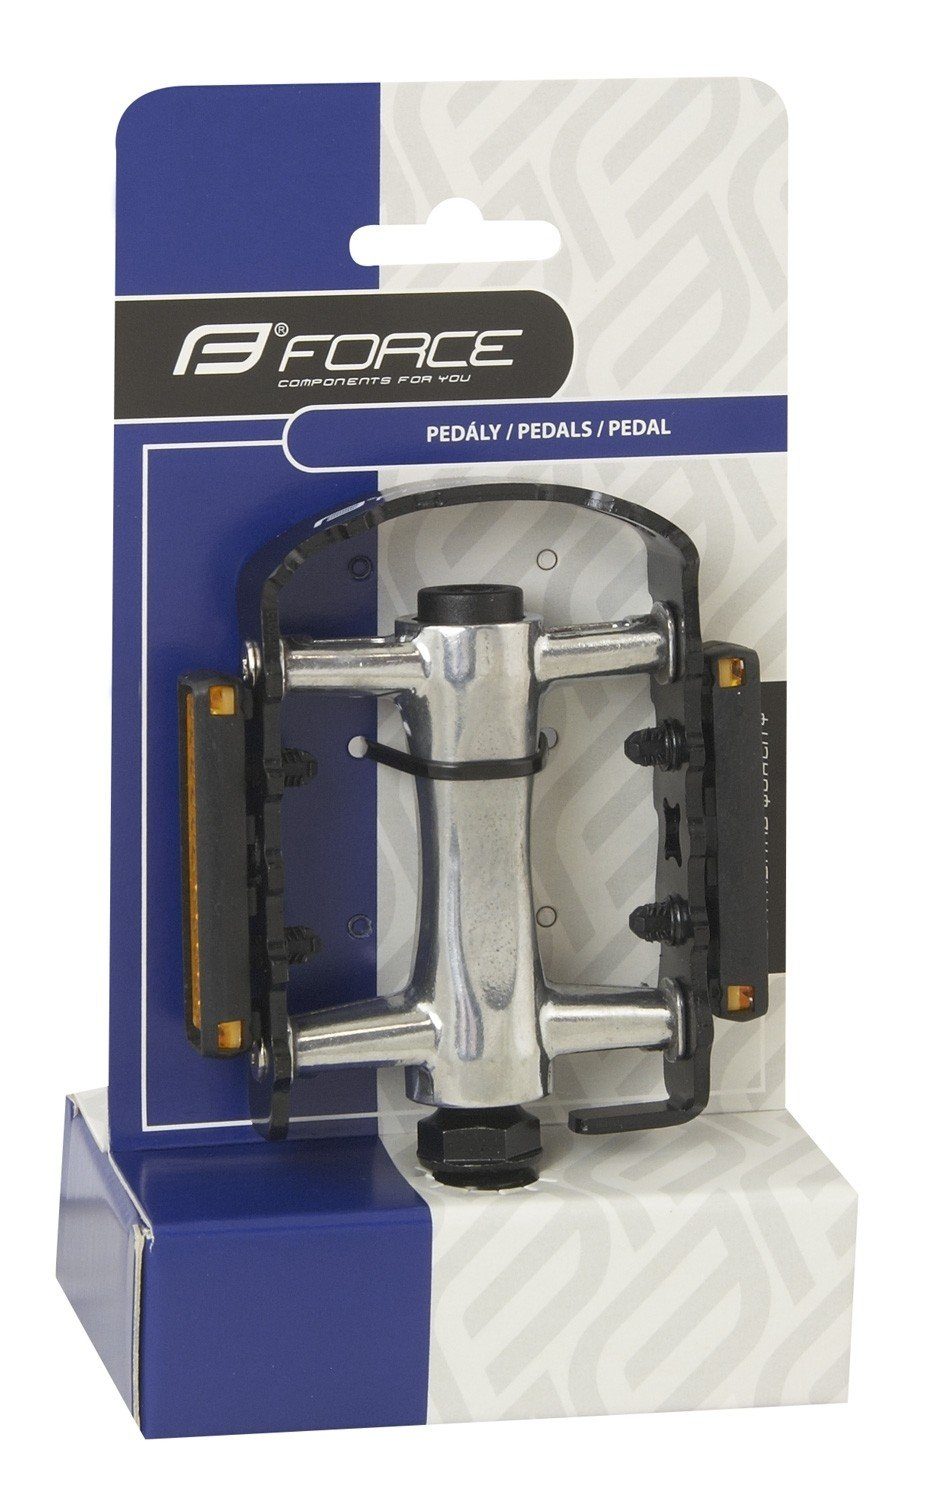 silver FORCE sealed alloy bearings. Fahrradpedale pedals FORCE